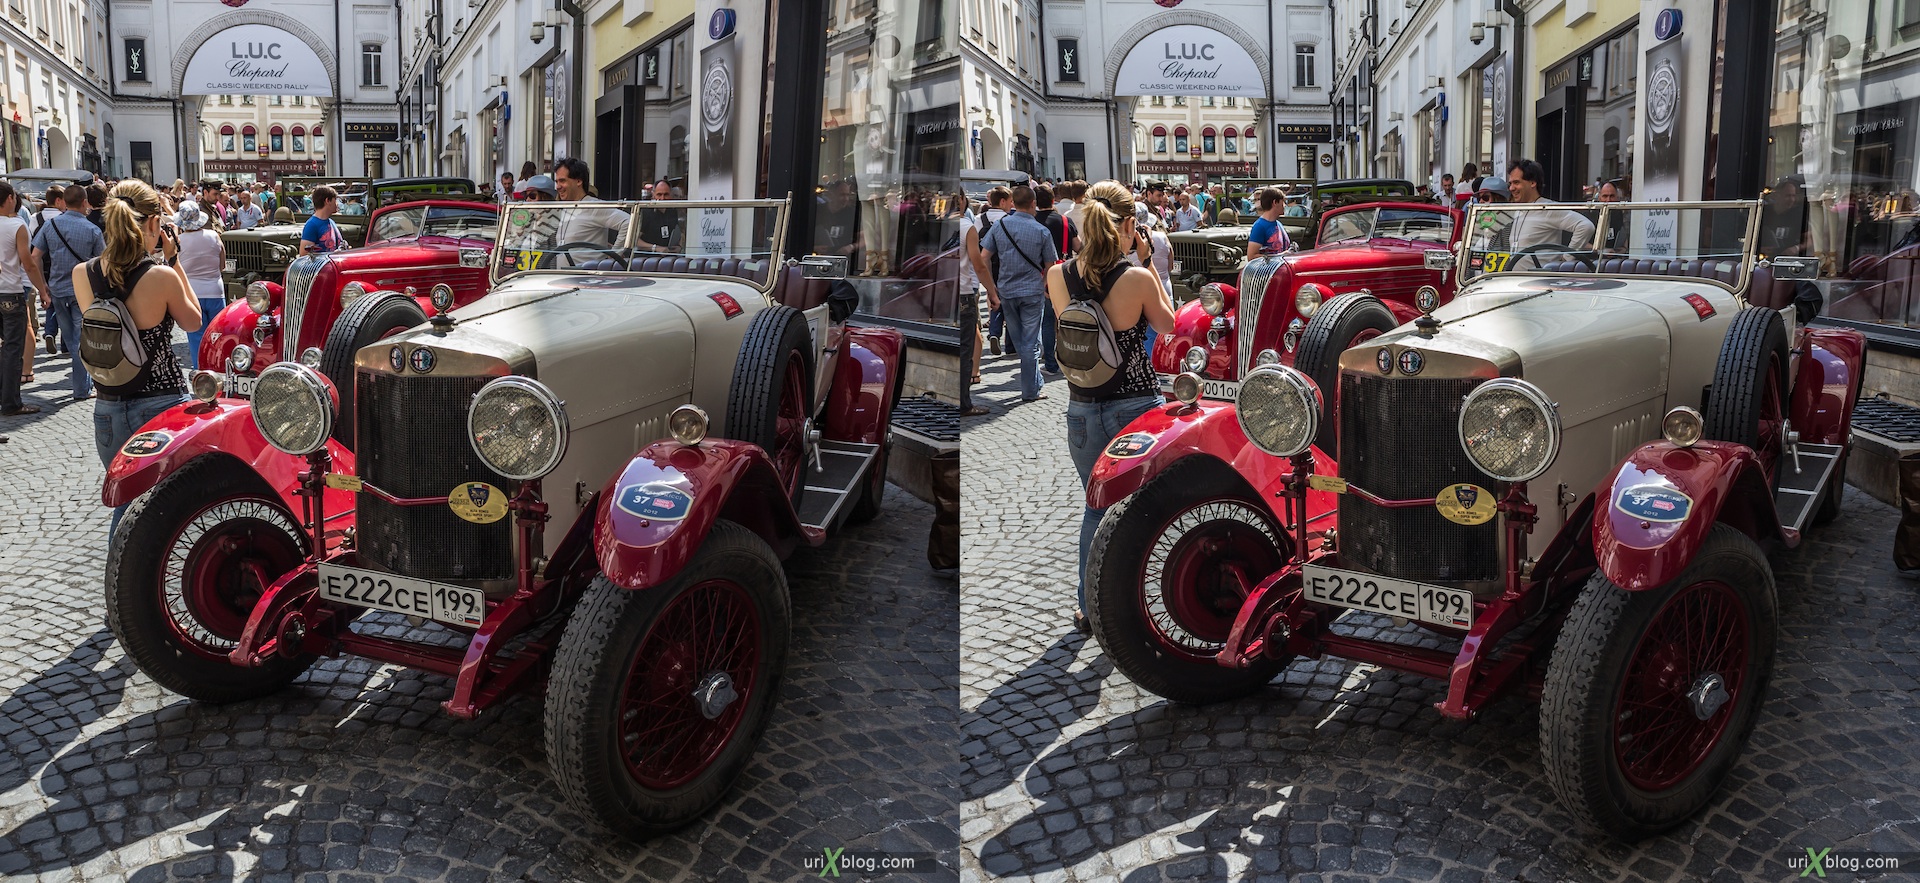 2013, old, automobile, rally, Moscow, Russia, 3D, stereo pair, cross-eyed, crossview, cross view stereo pair, stereoscopic